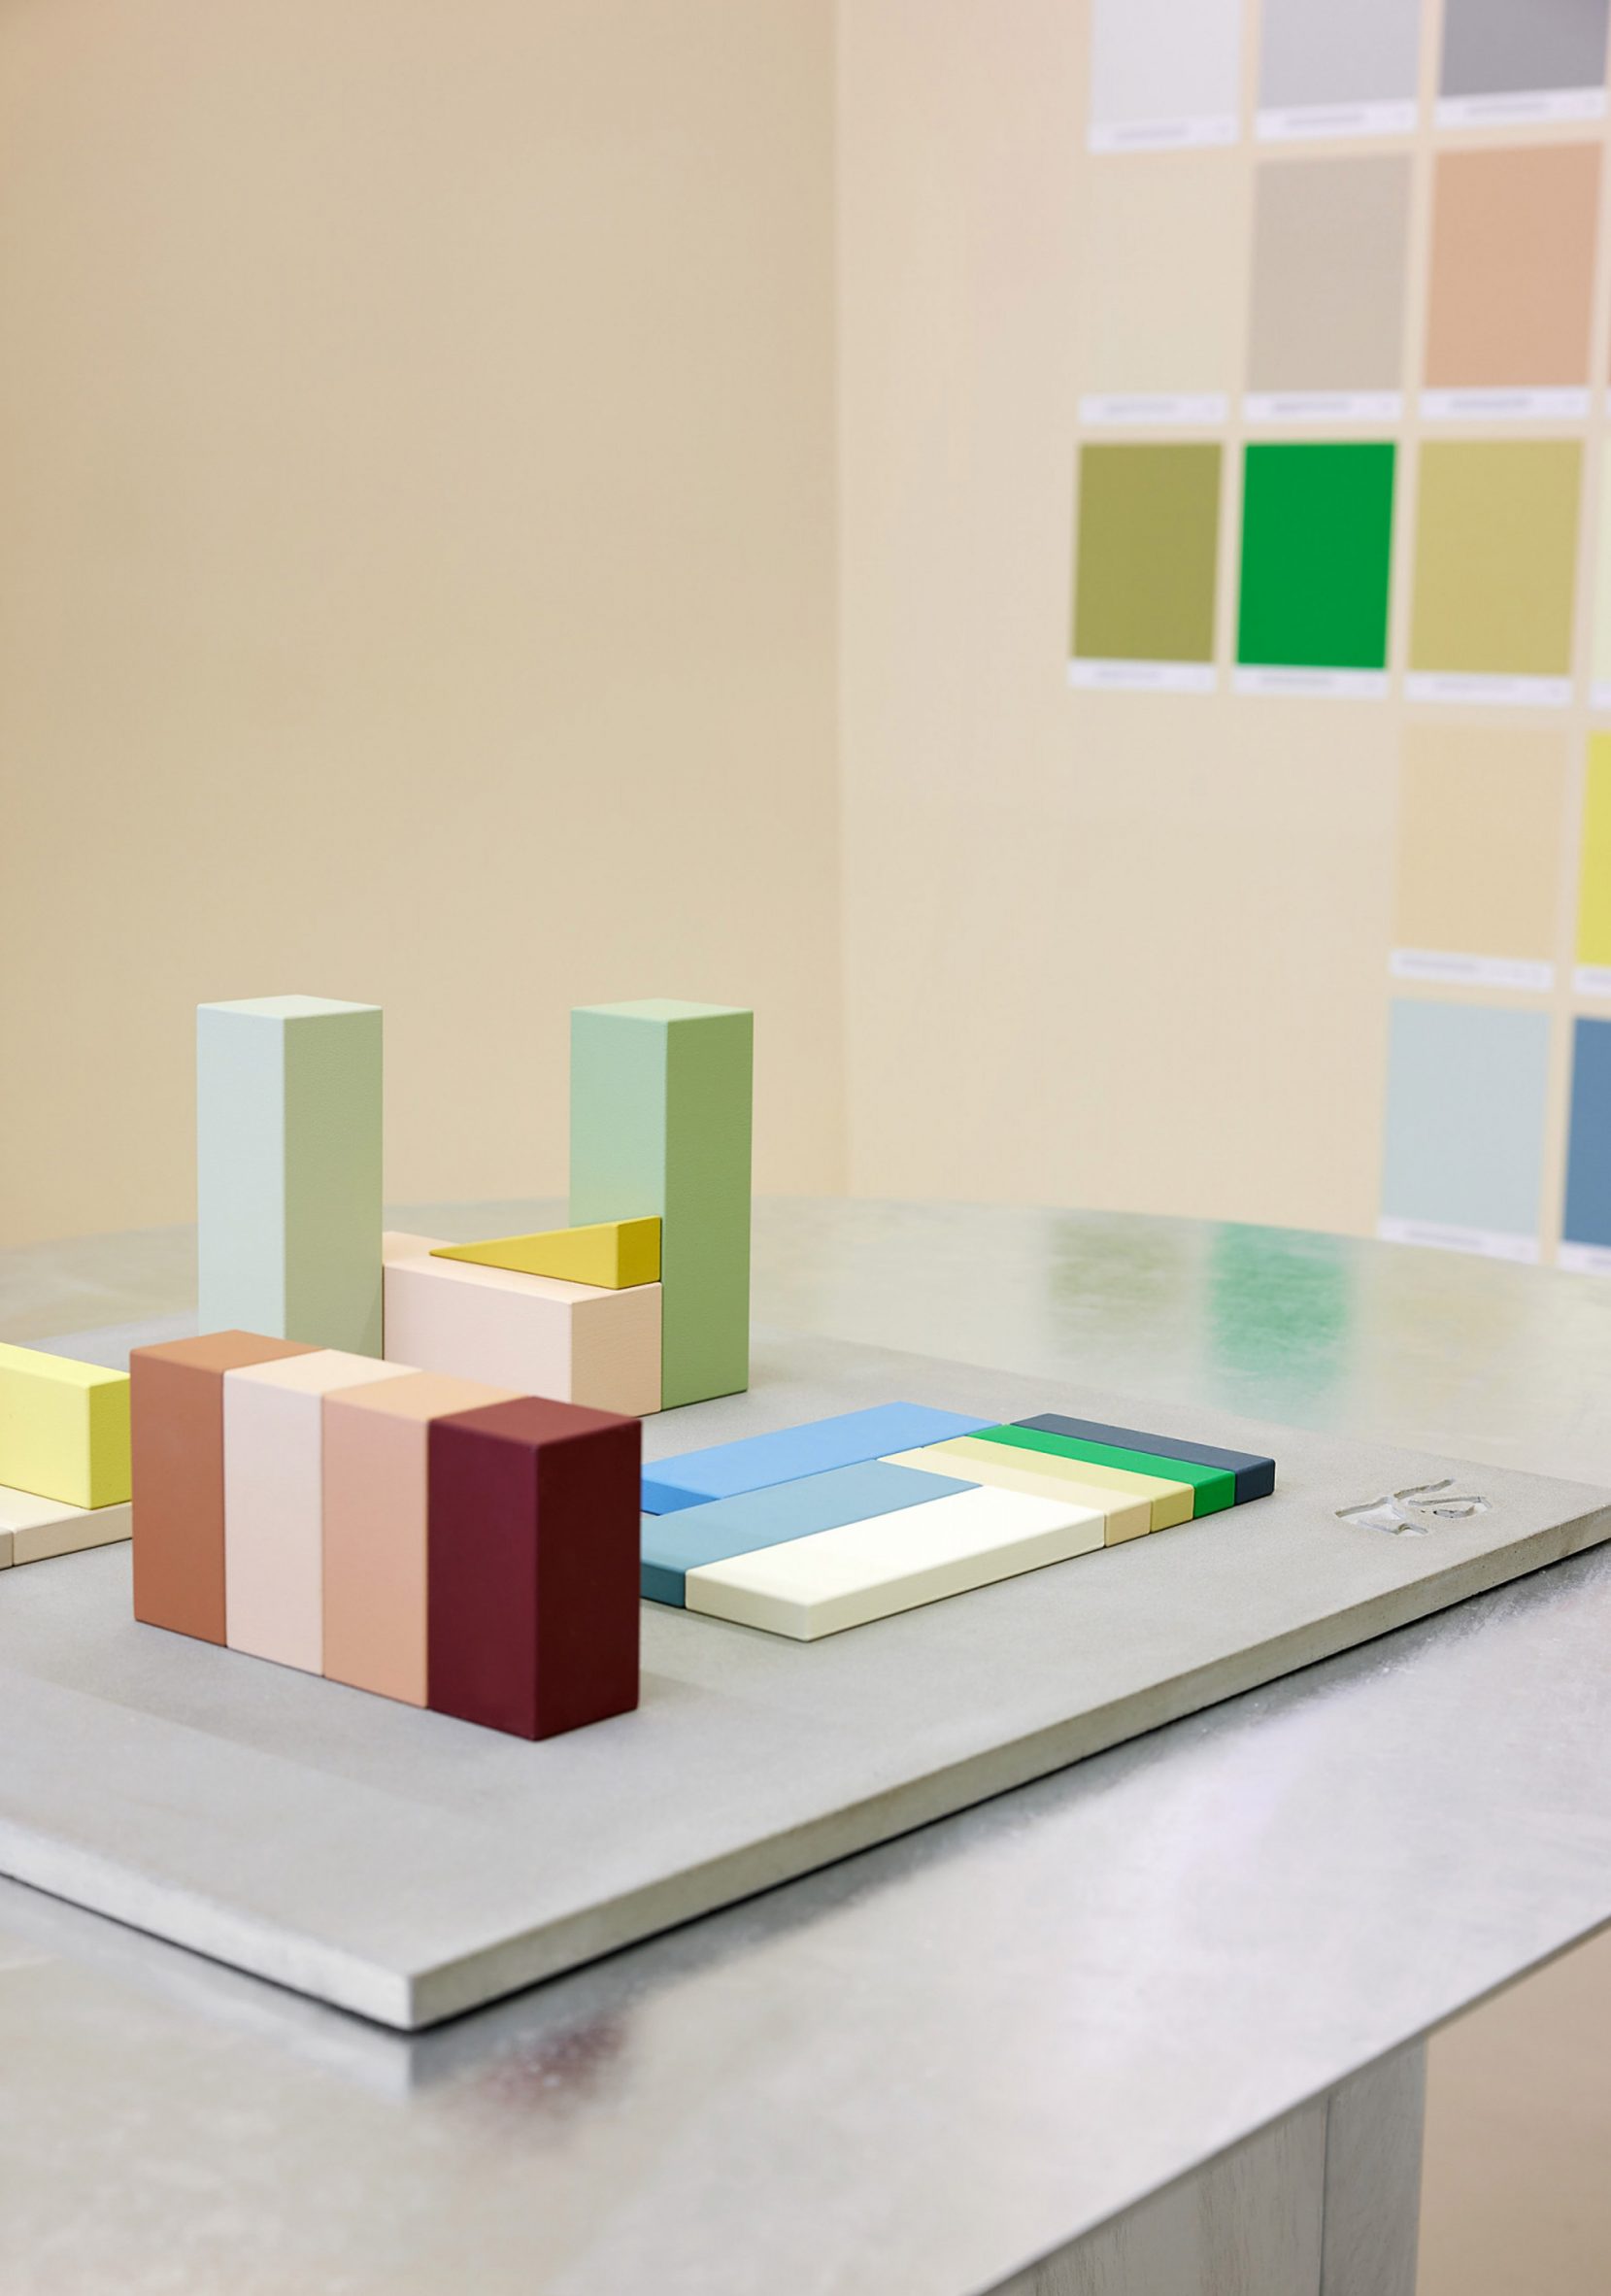 Colourful blocks on a silvery table